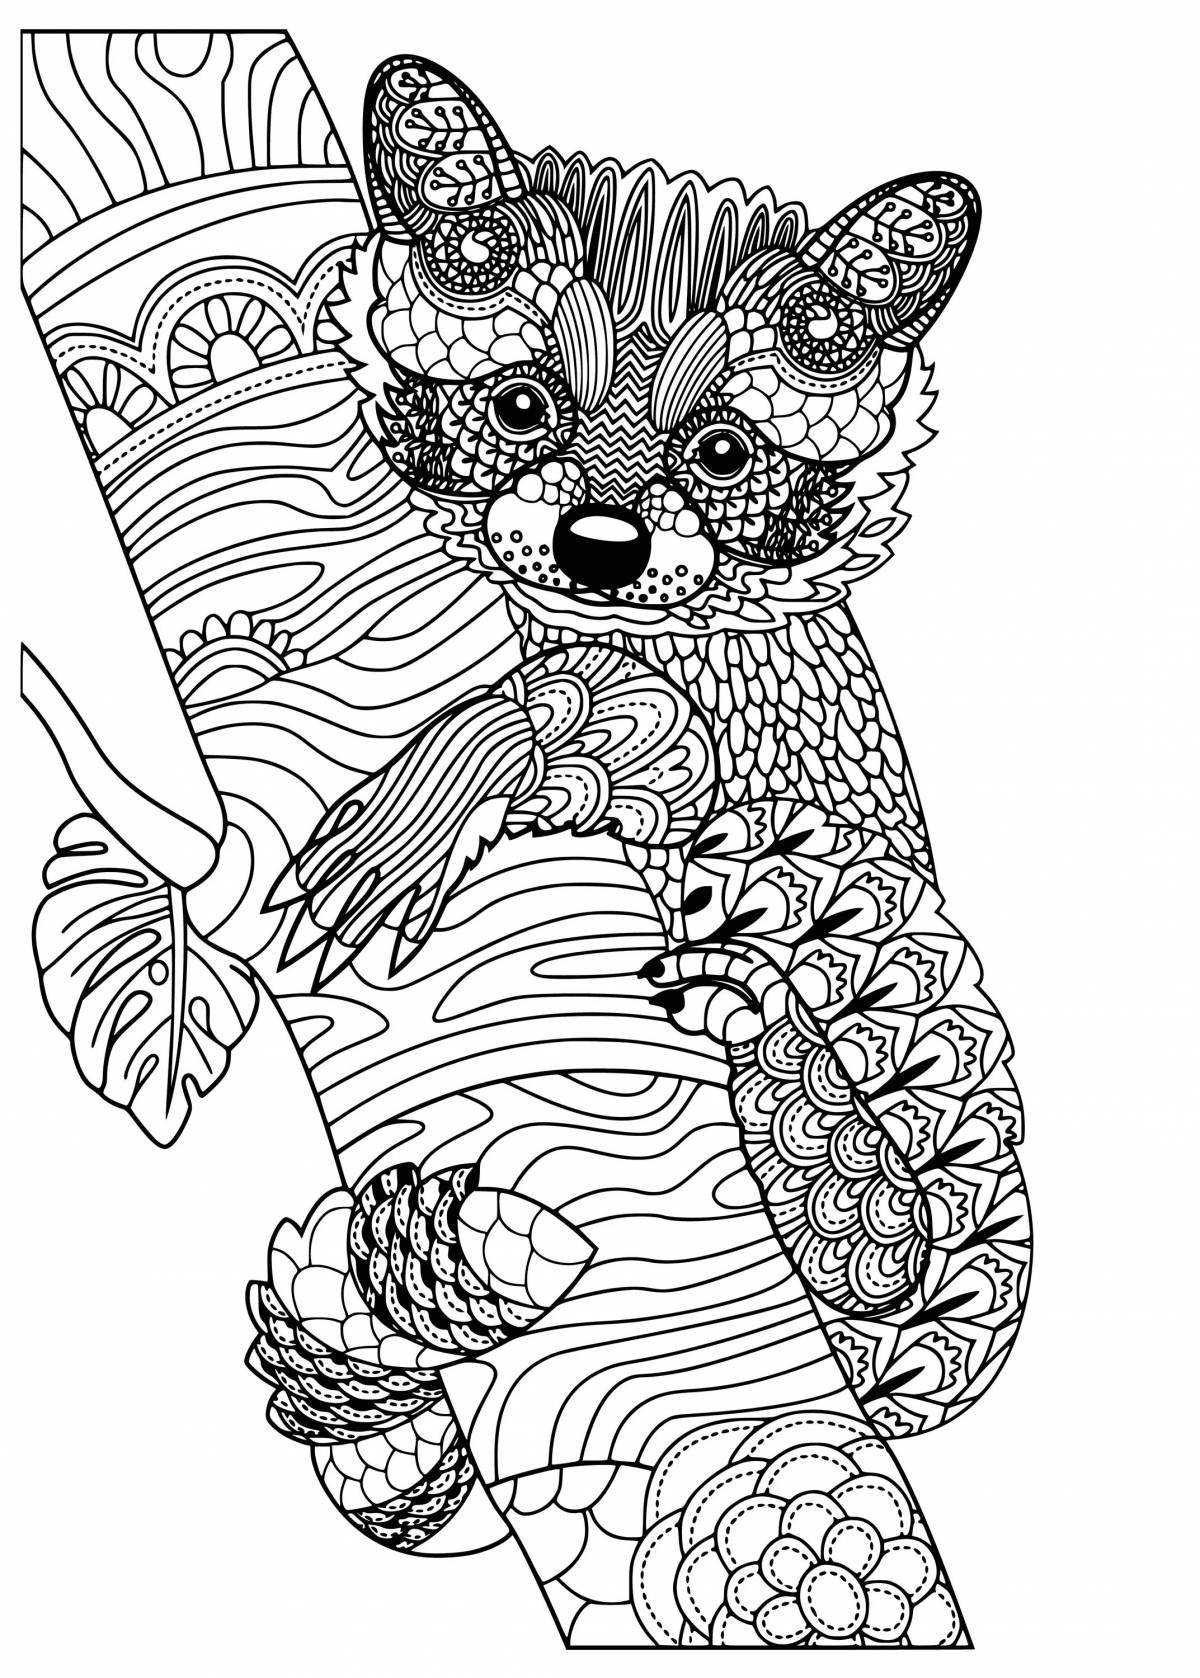 Adorable animal coloring book for girls 12 years old